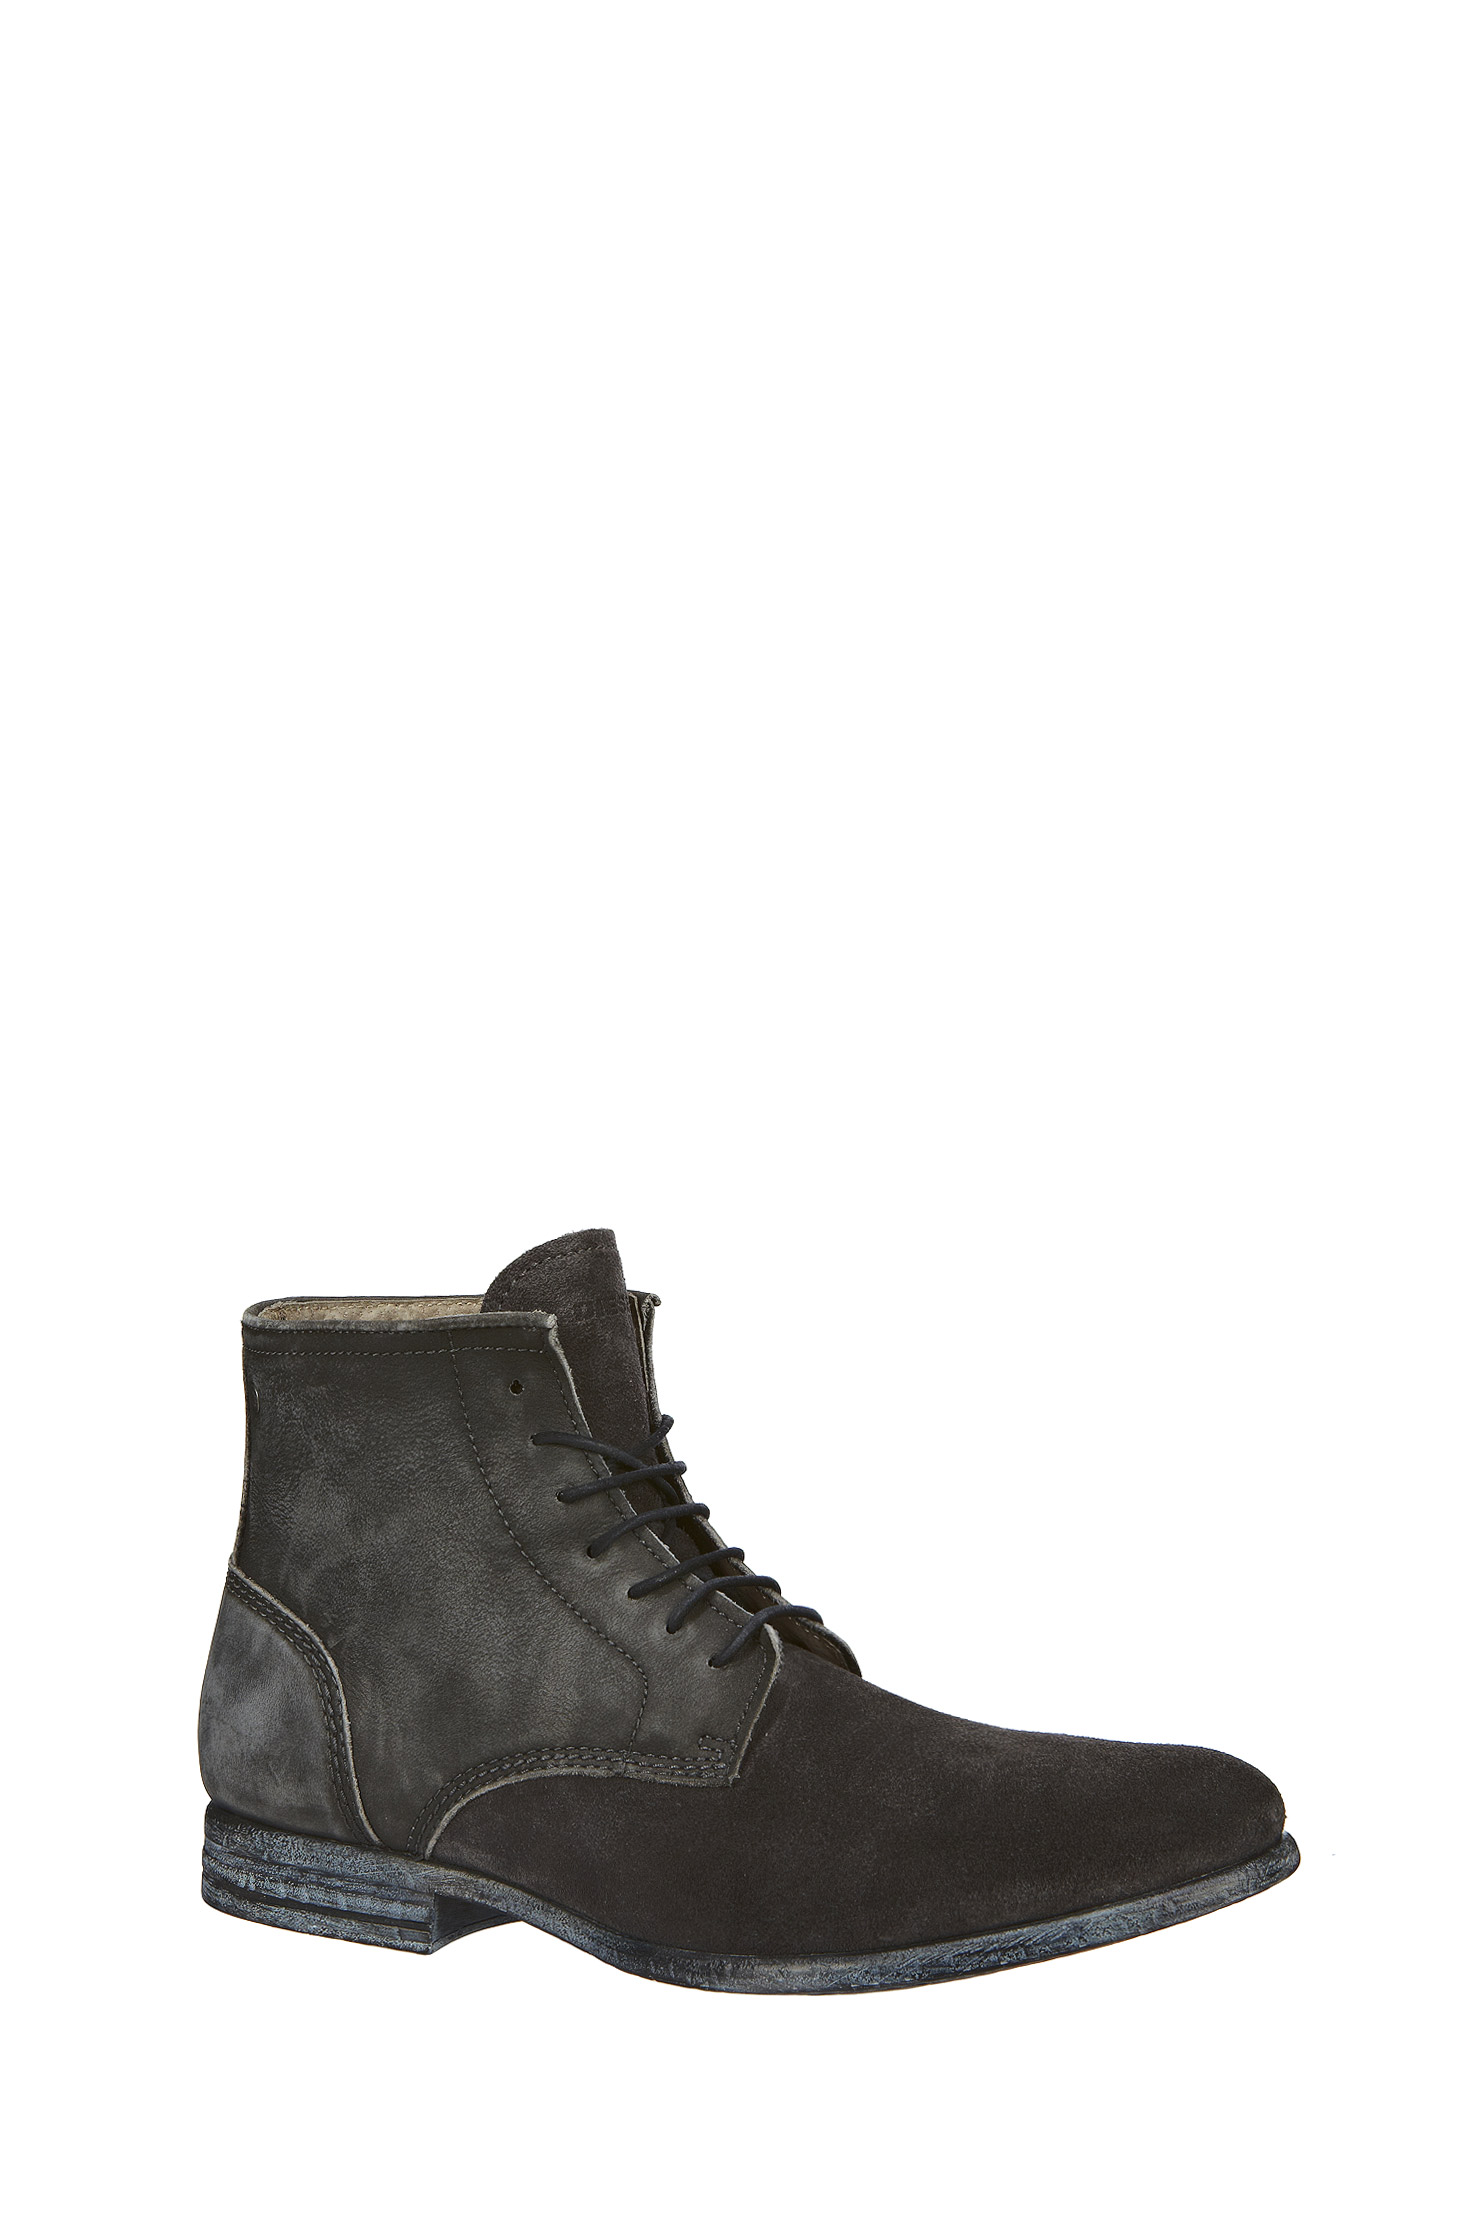 Diesel Boots Boa Vista Chrom Hi Shoes in Gray for Men | Lyst